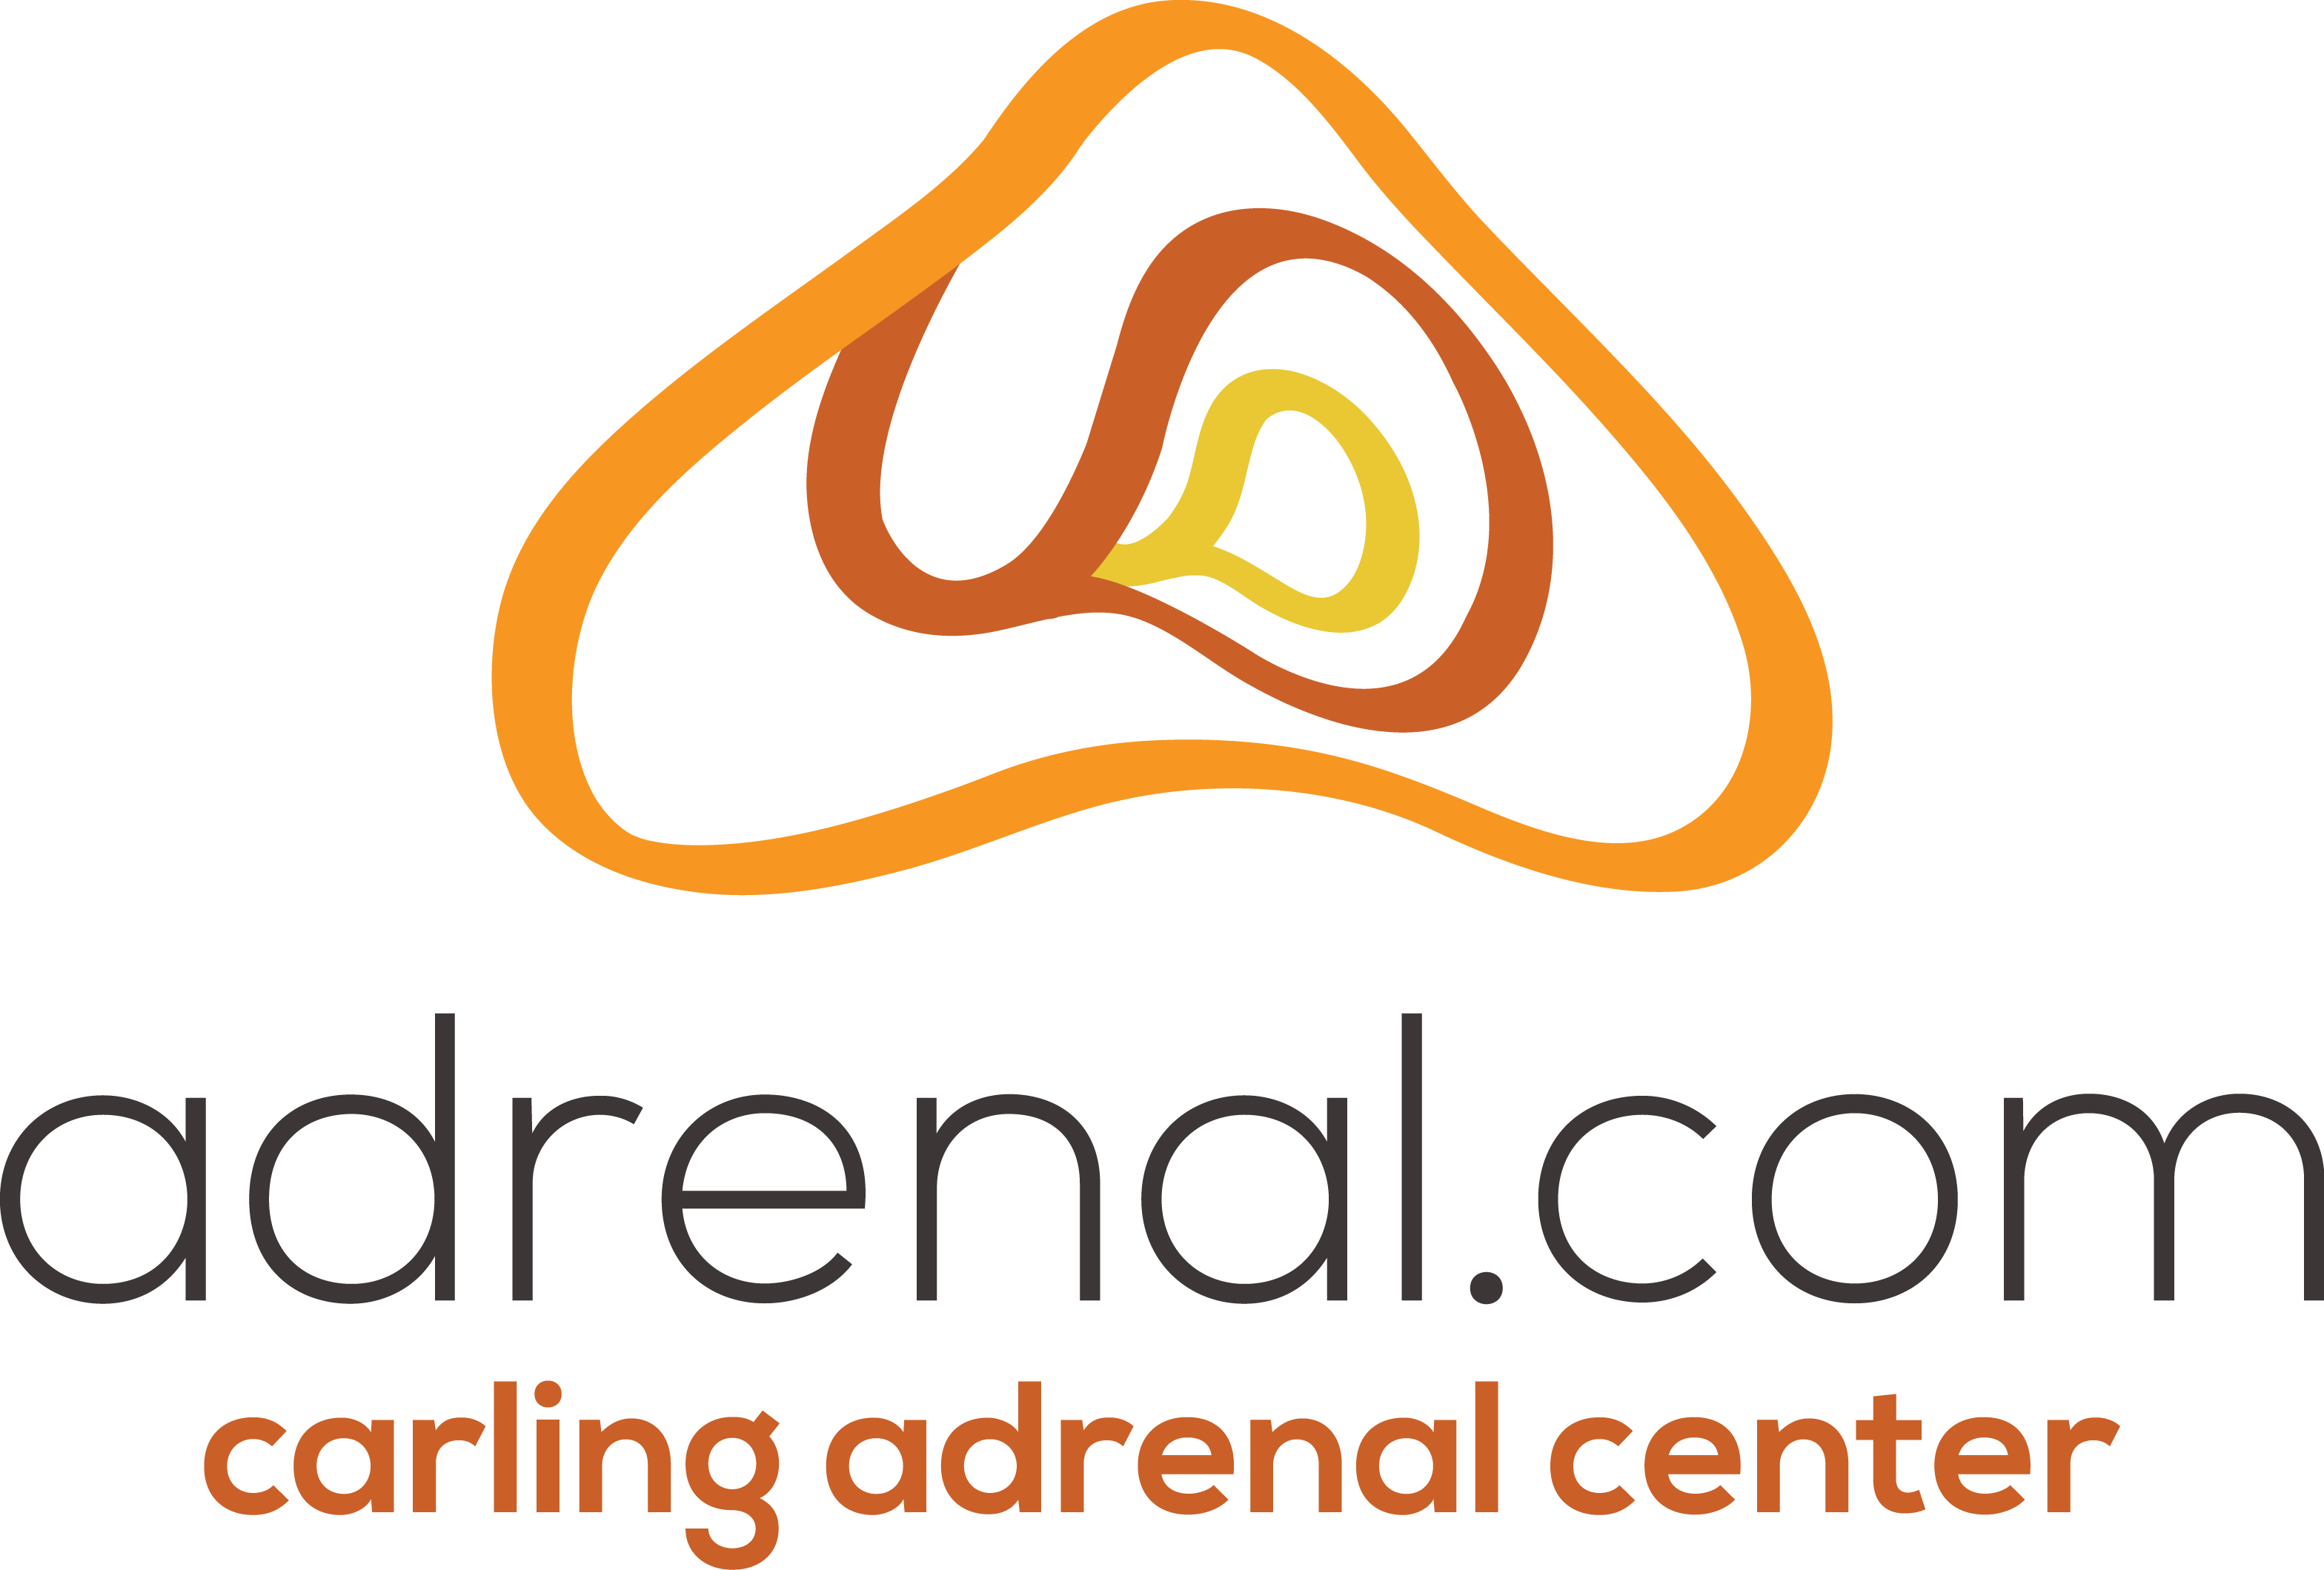 adrenal.com is a comprehensive and easy to understand source for information on all adrenal disorders.